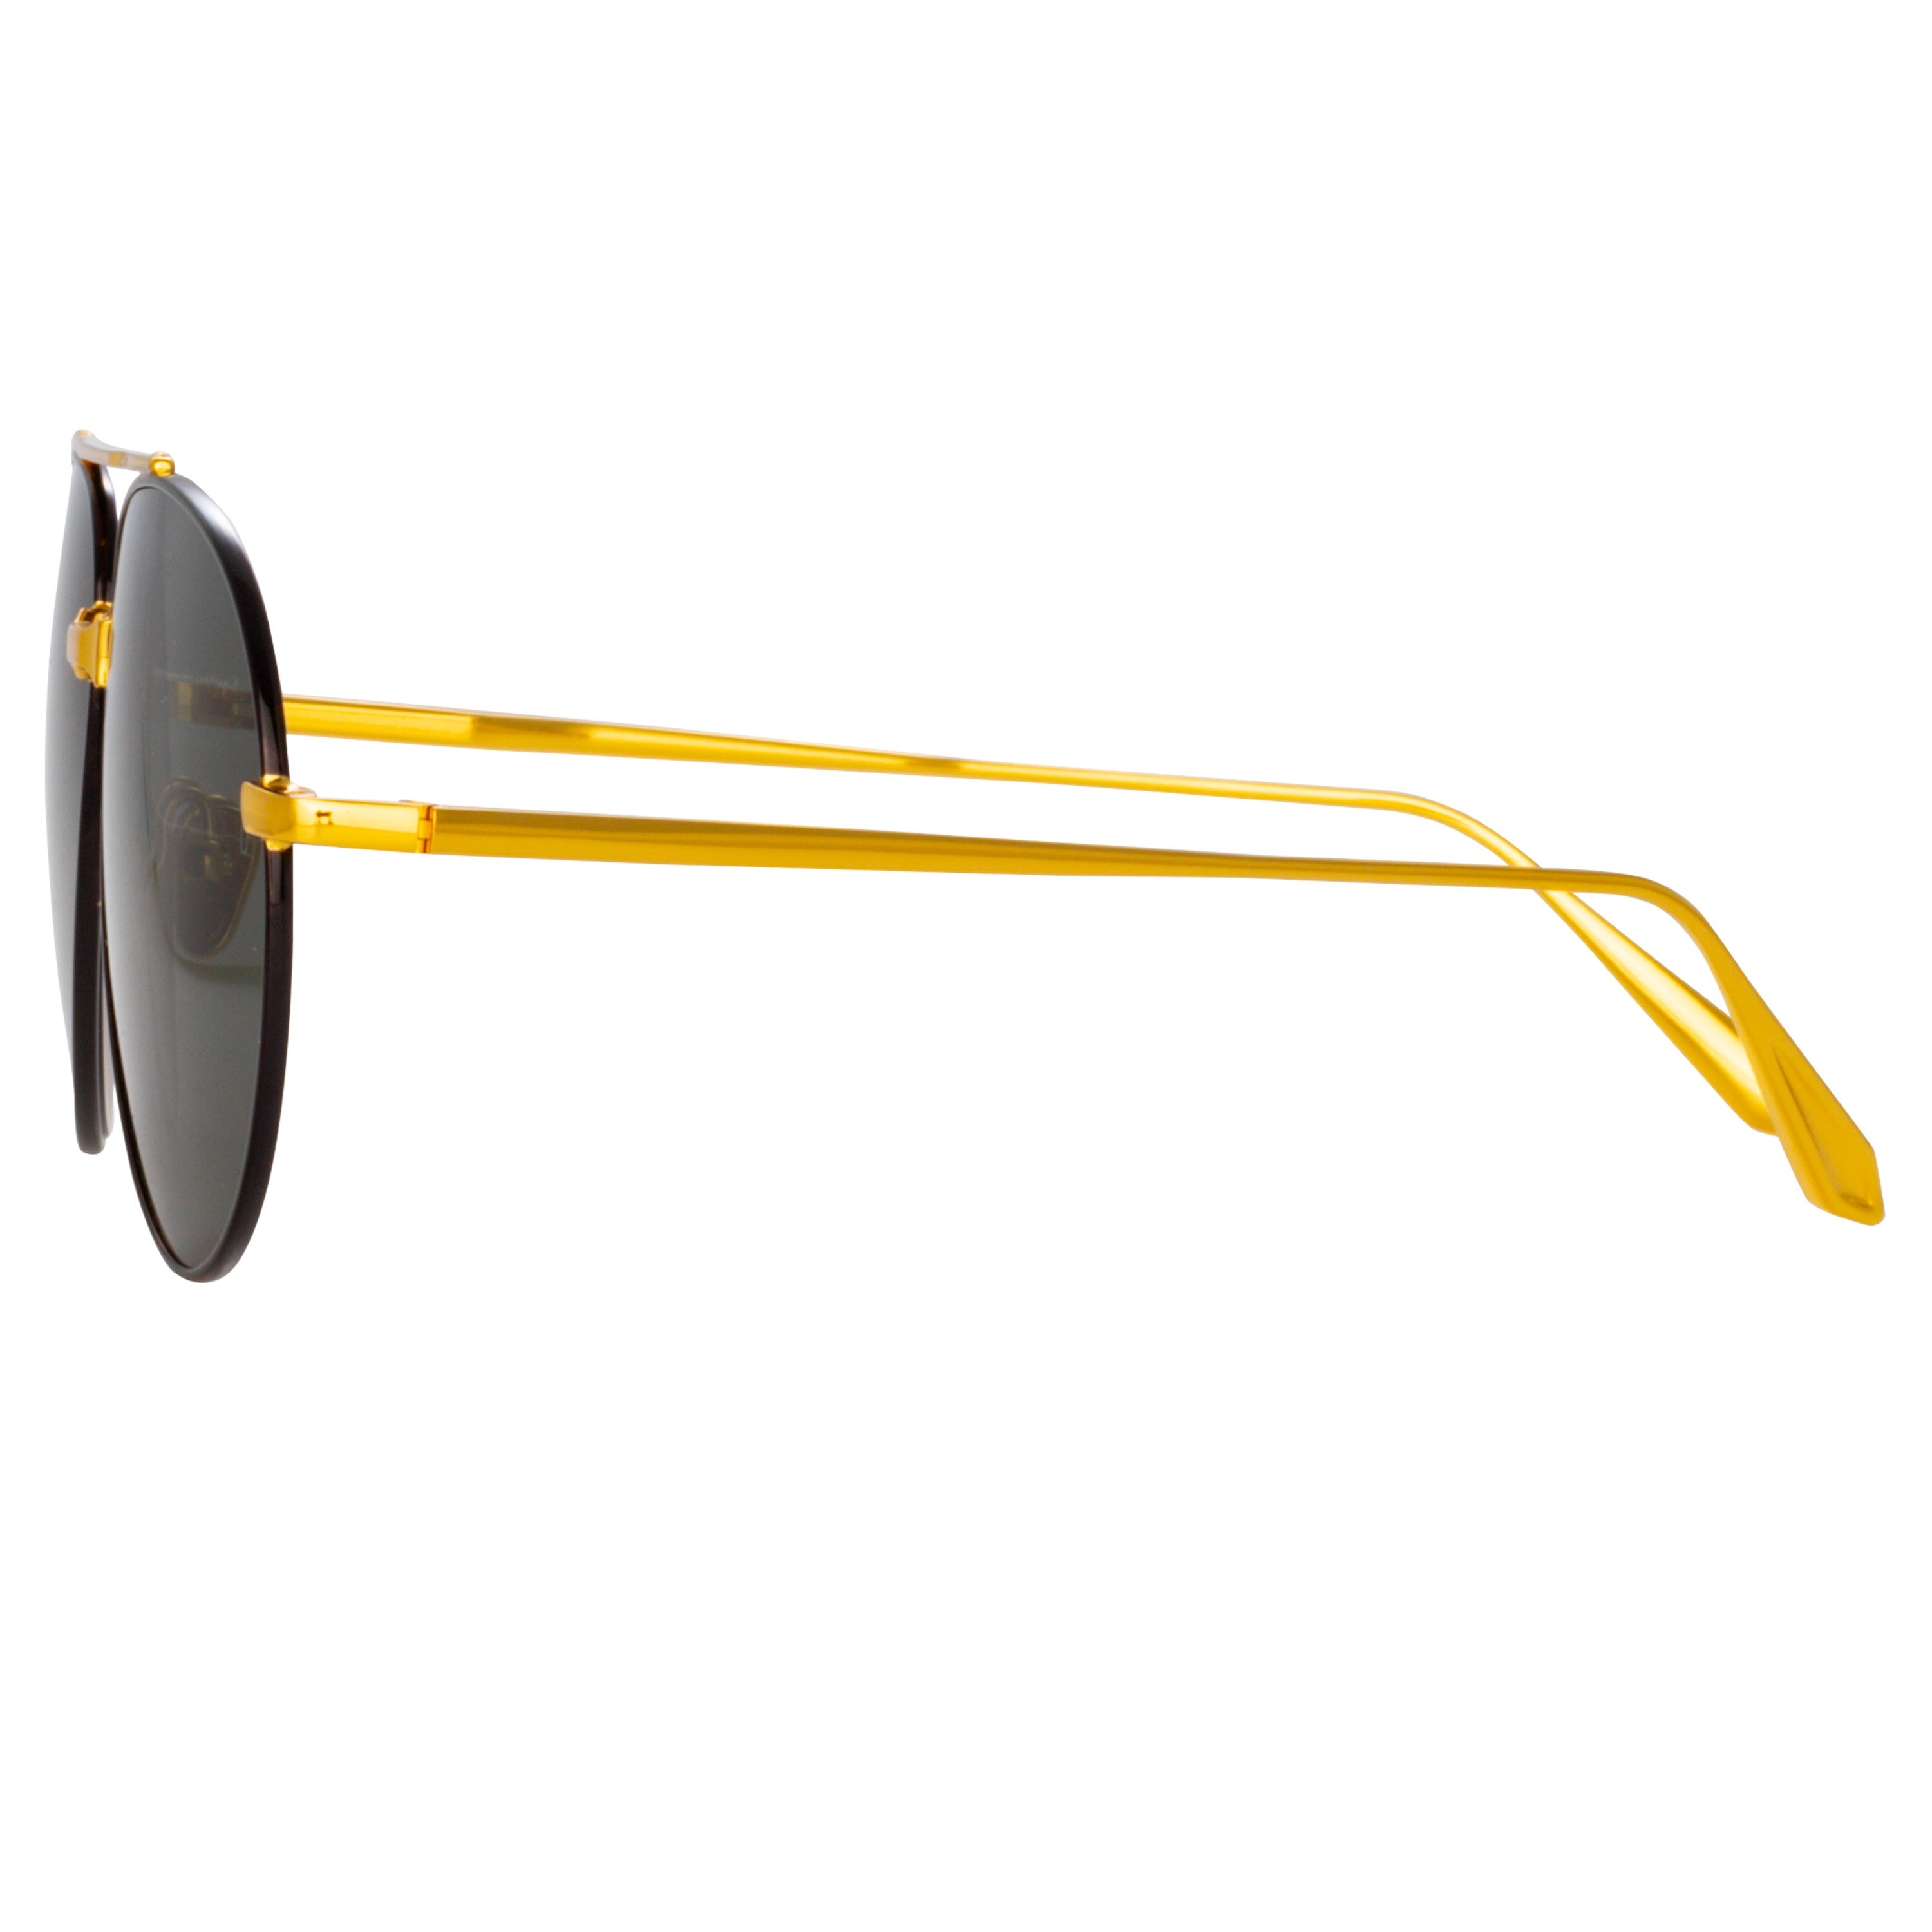 MARCELO AVIATOR SUNGLASSES IN BLACK AND YELLOW GOLD - 5